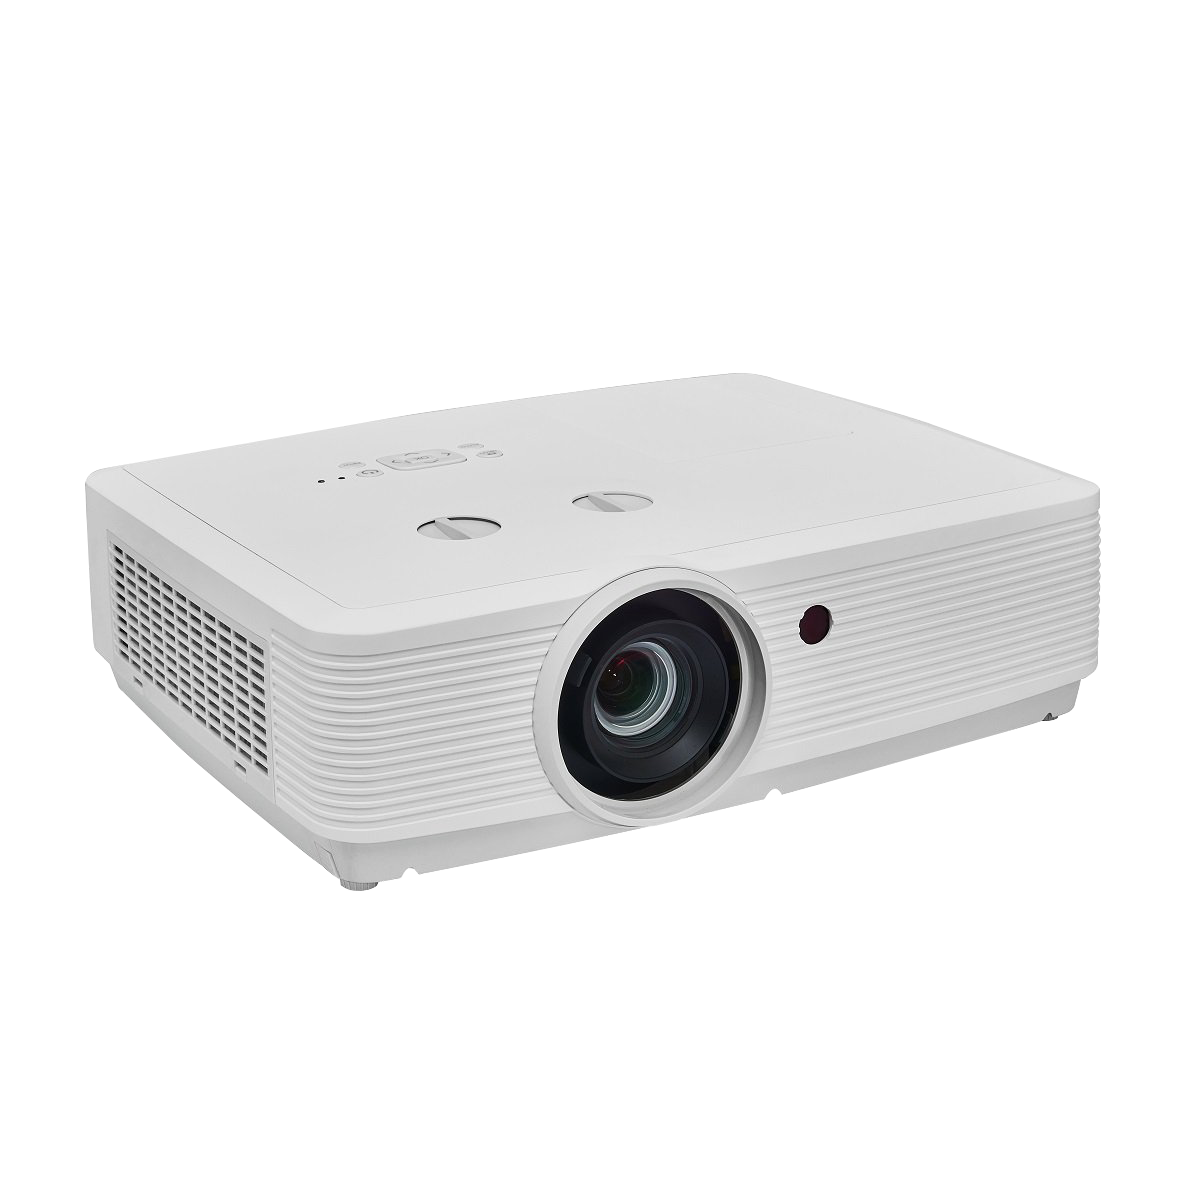 SMX MX-L550U 5500 Lumens WUXGA 3LCD Projector For Meeting Room Game with cheap price